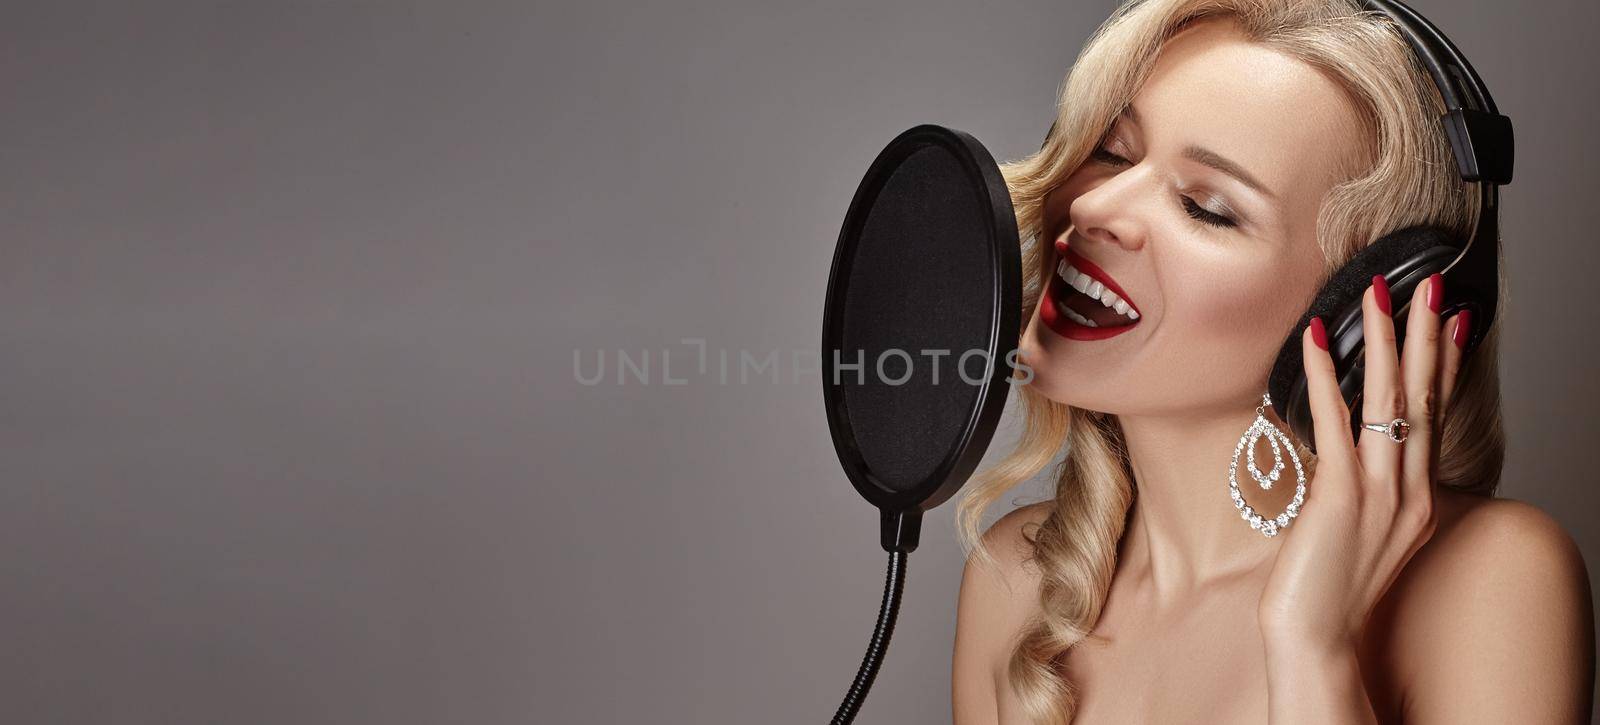 Blonde Woman Singing Song in Recording Studio with Microphone, Headphones. Glamour Diva Creates Musical Track. Karaoke by MarinaFrost